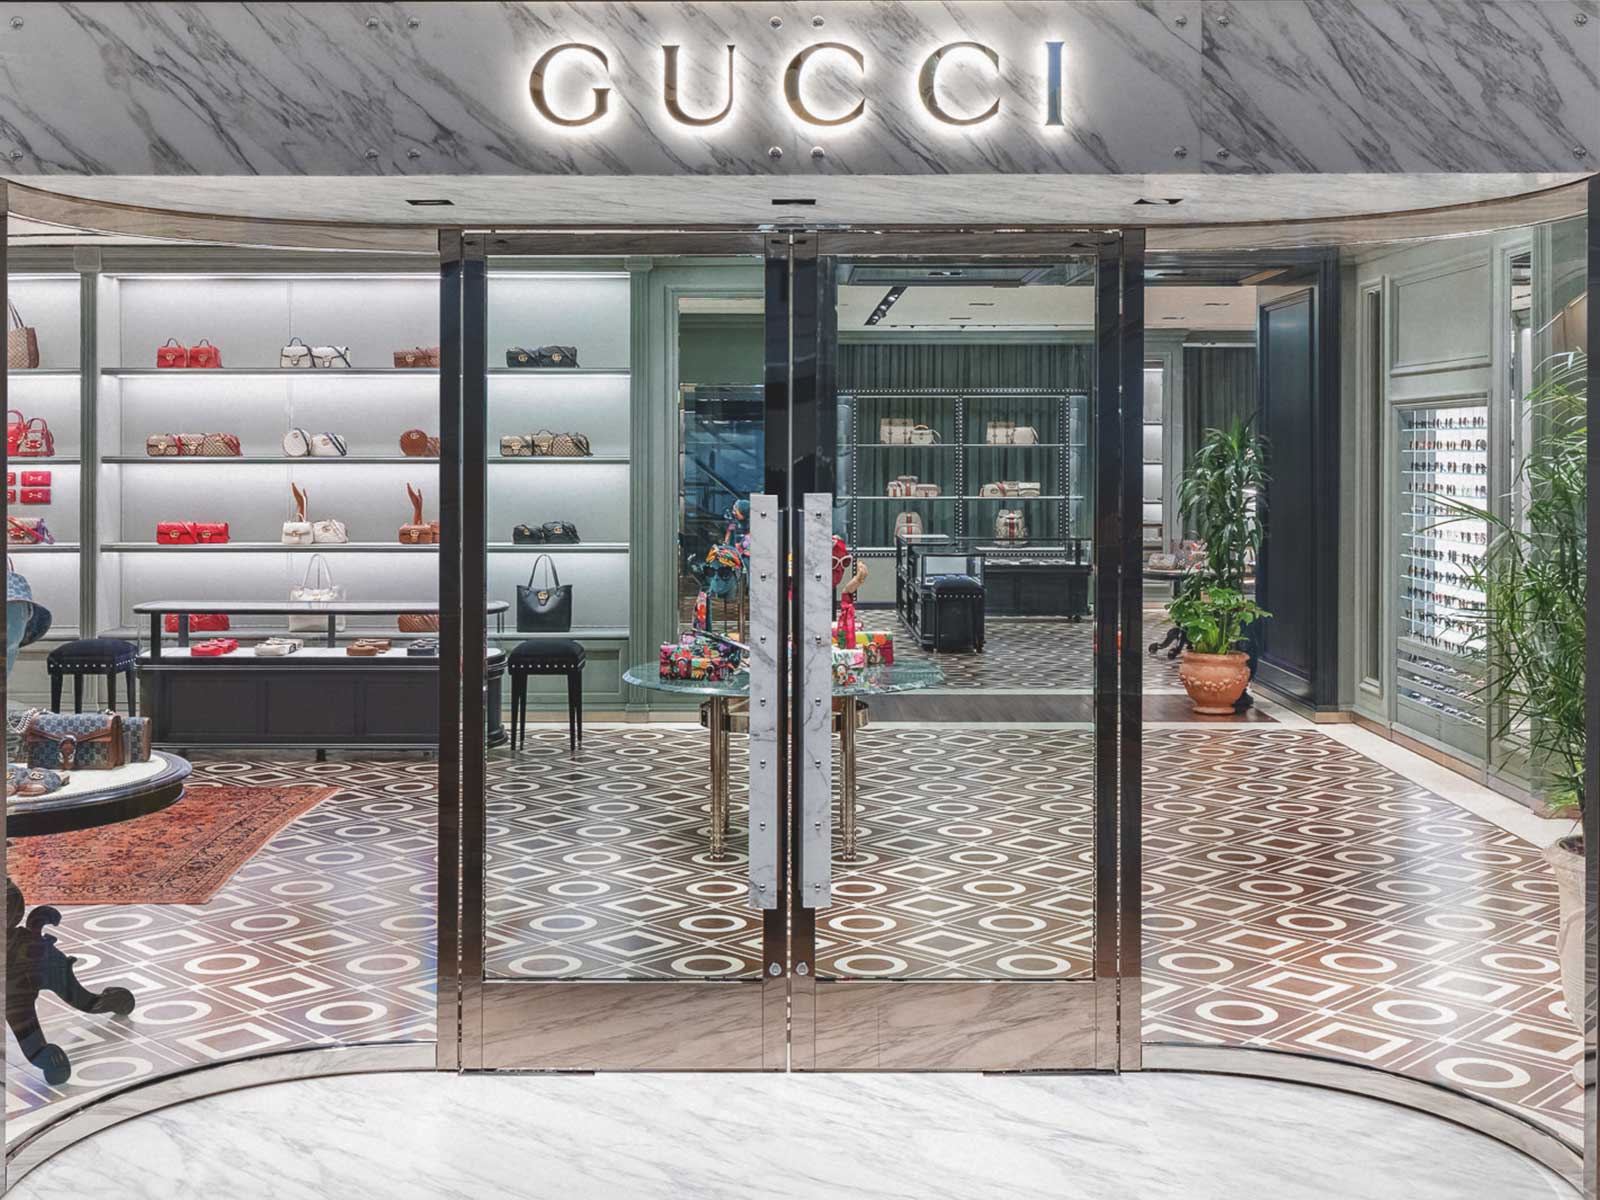 Gucci updates its payment methods and accepts cryptocurrencies